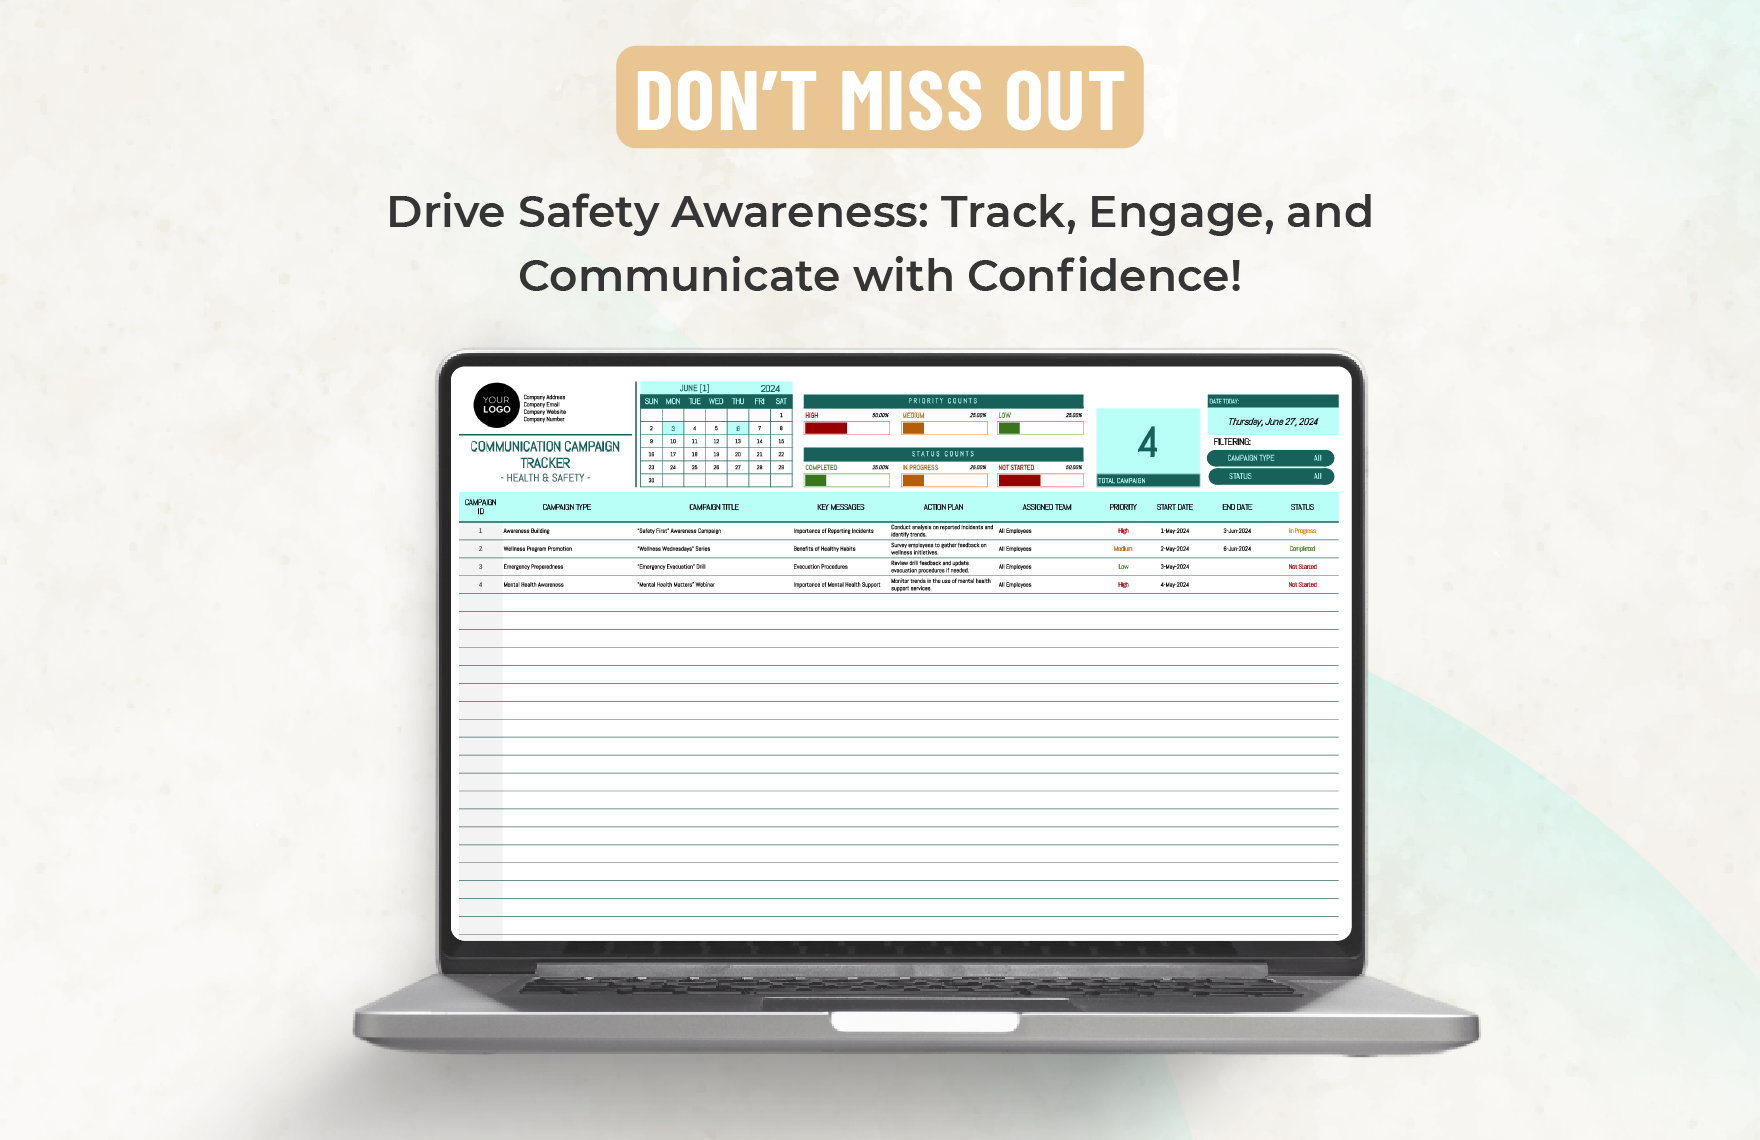 Health & Safety Communication Campaign Tracker Template